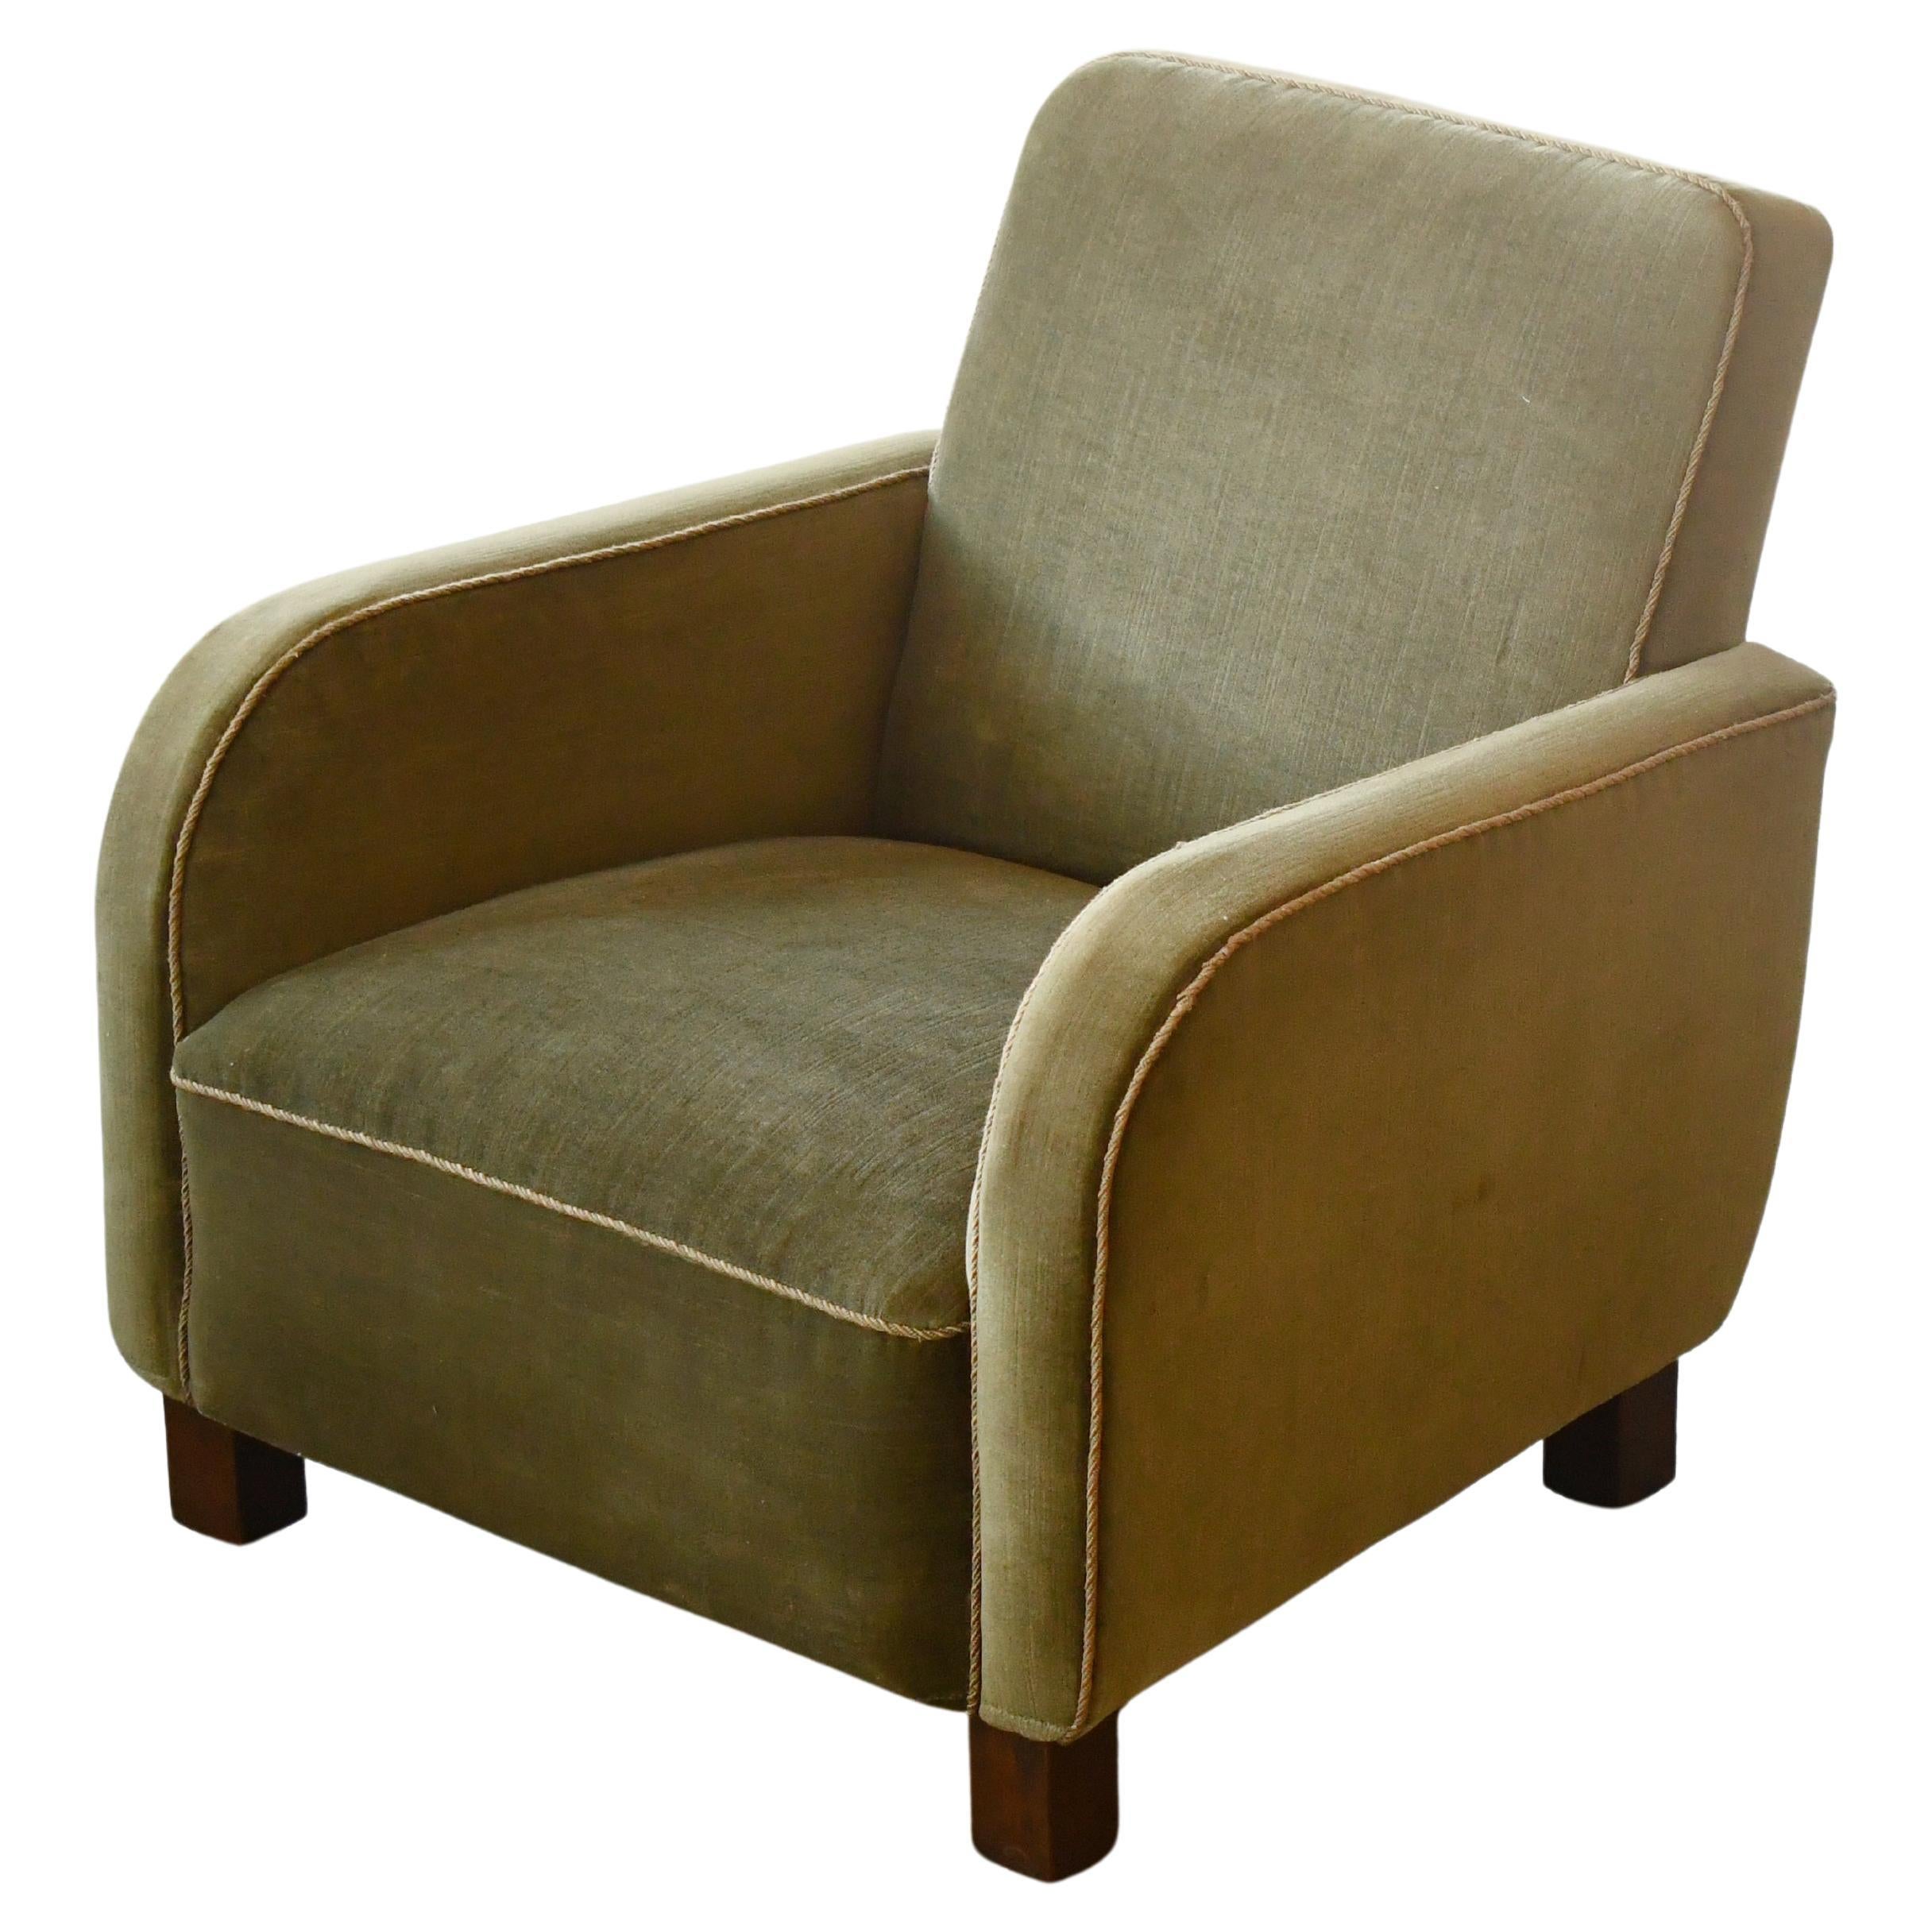 1930-40s Danish Art Deco or Early Midcentury Lounge Chair in Green Mohair For Sale